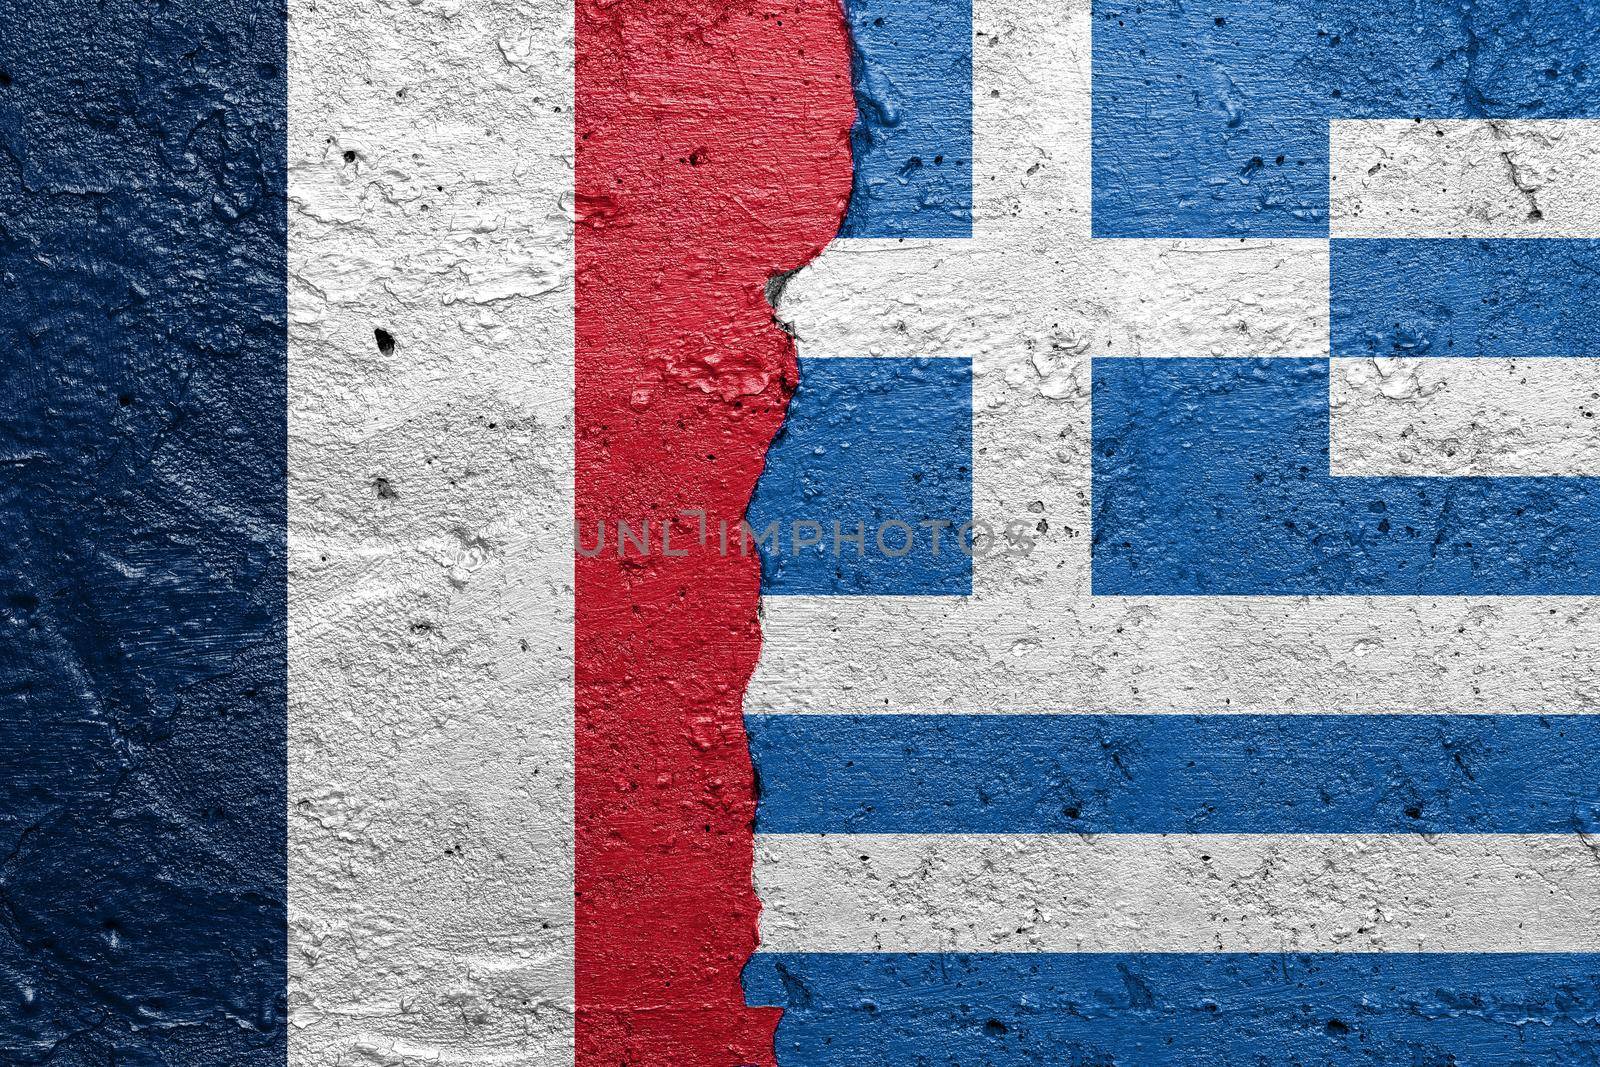 France and Greece - Cracked concrete wall painted with a French flag on the left and a Greek flag on the right stock photo by adamr